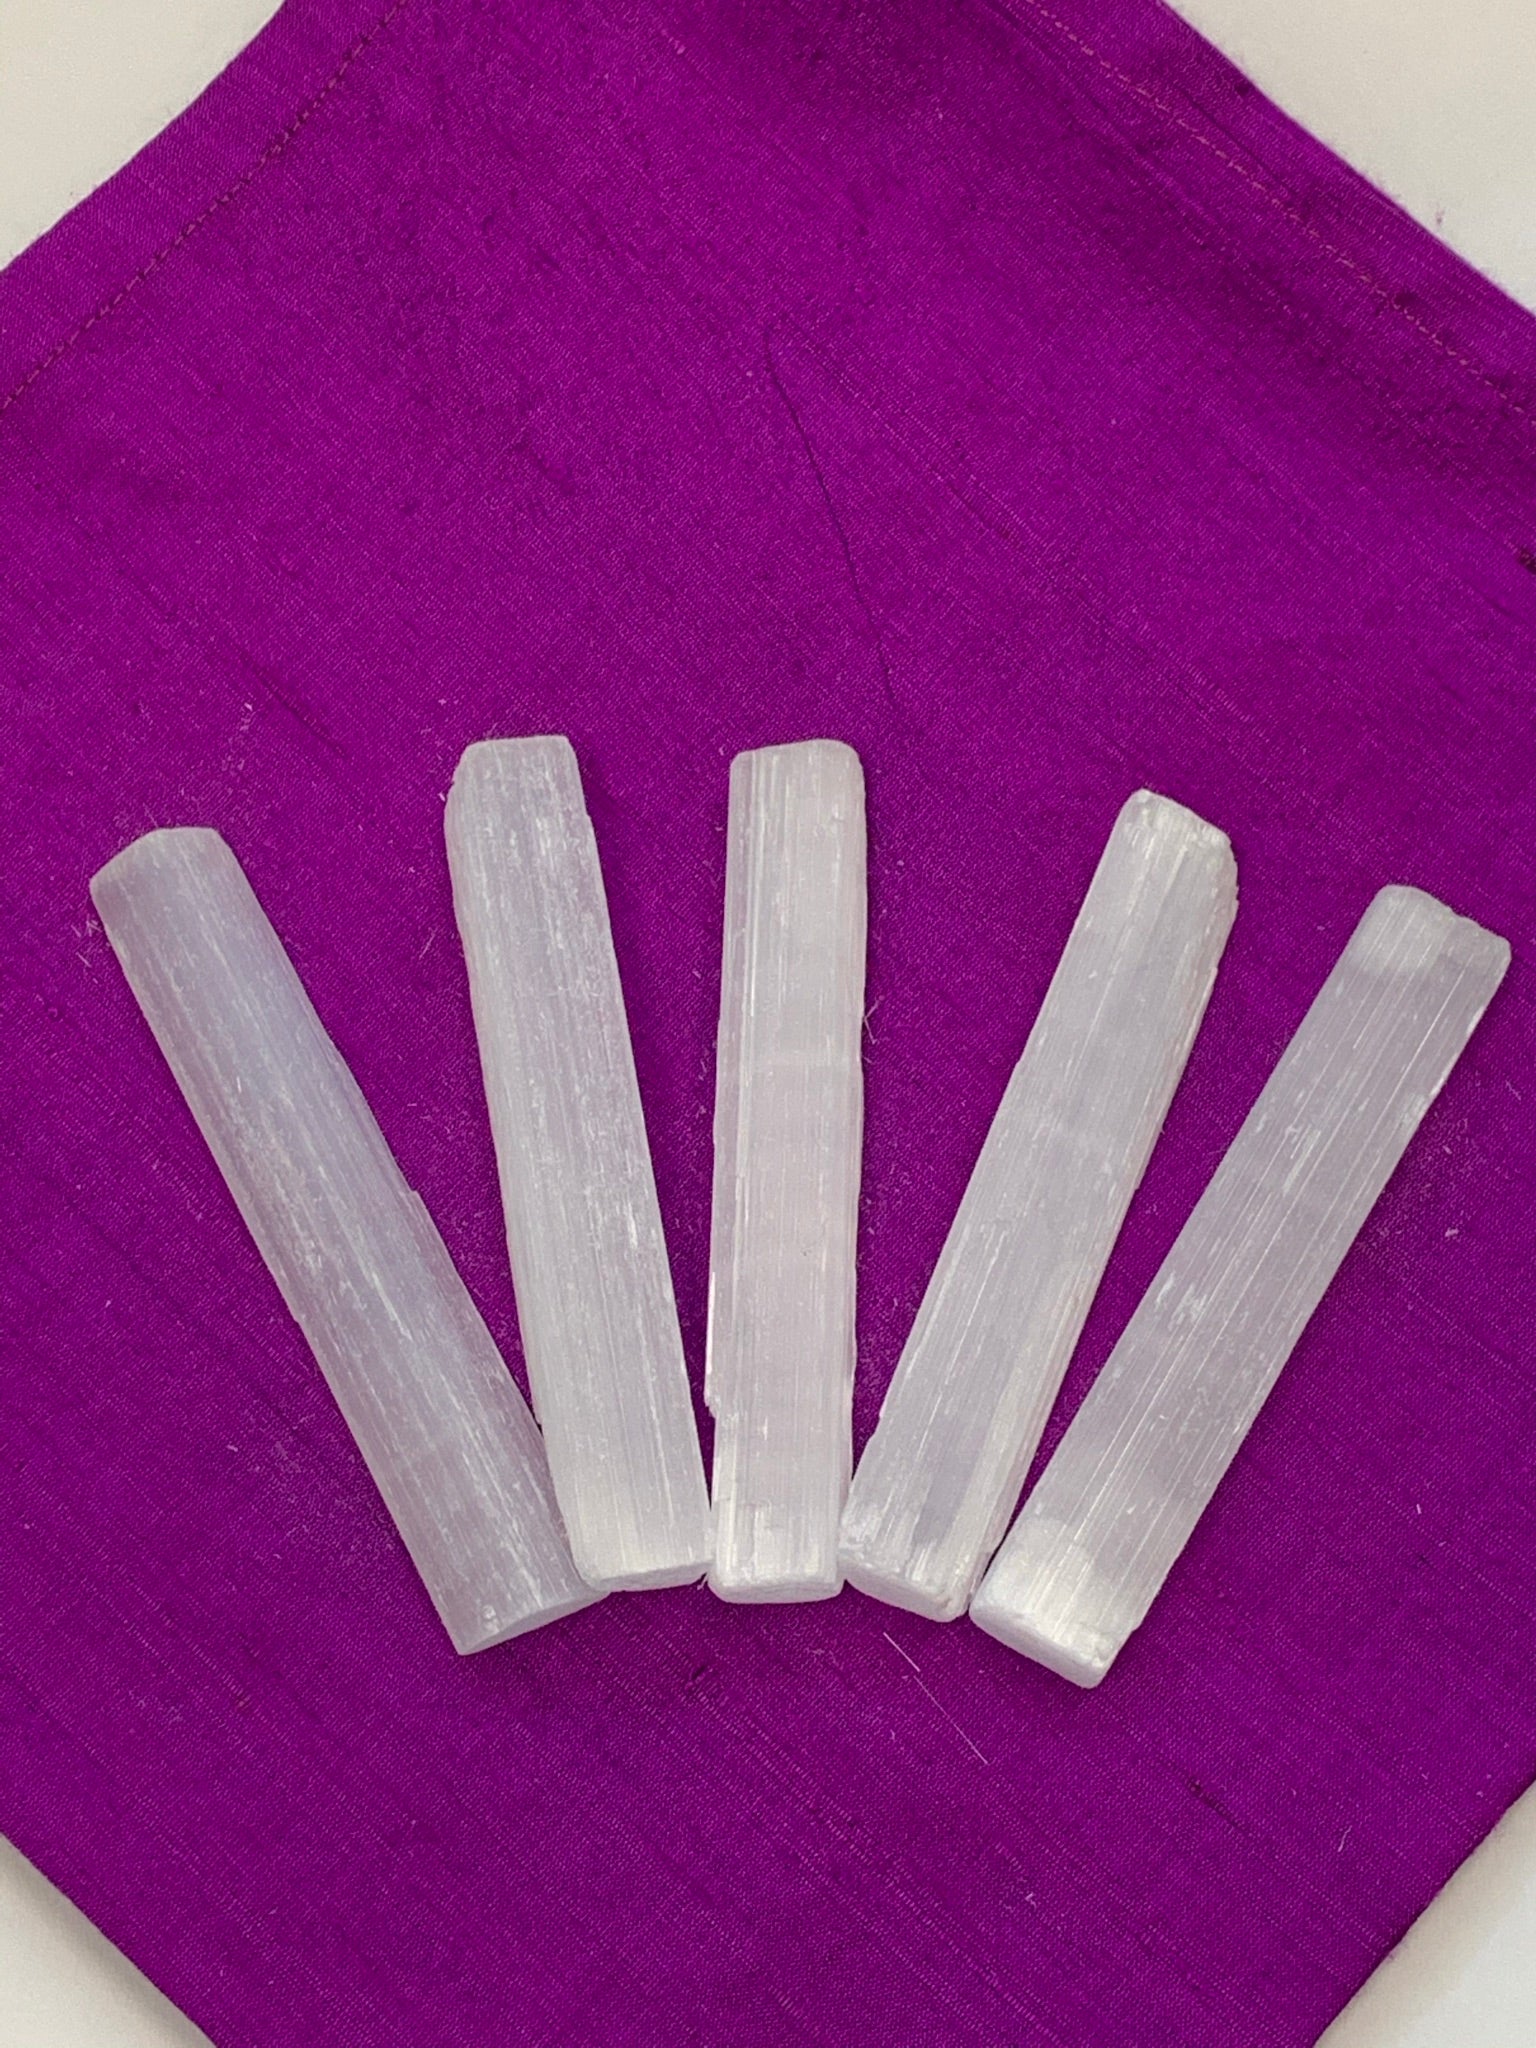 Five-Pack of white selenite wands. They are approximately 4" in length. Each of the five wands will look different as no two are alike. Sizes are approximate. These are great for cleansing your energy. Wave it around you as you would with a sage stick to cleanse your energy and aura. 